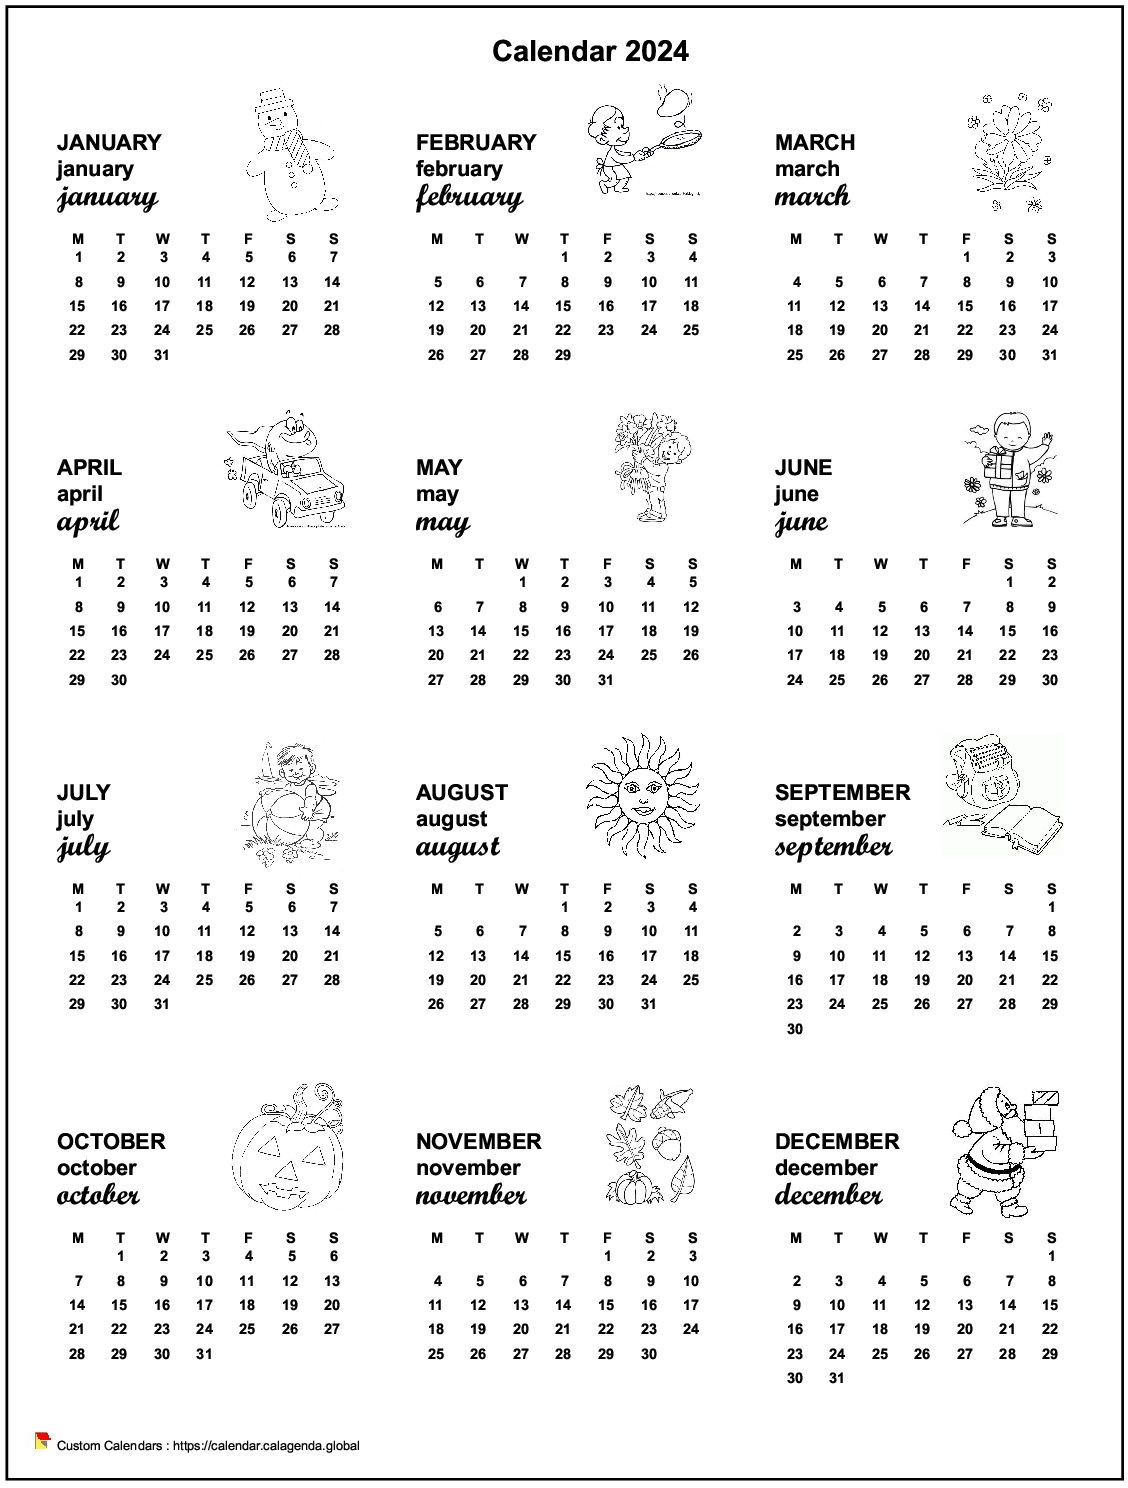 Calendar 2094 annual maternal and primary school